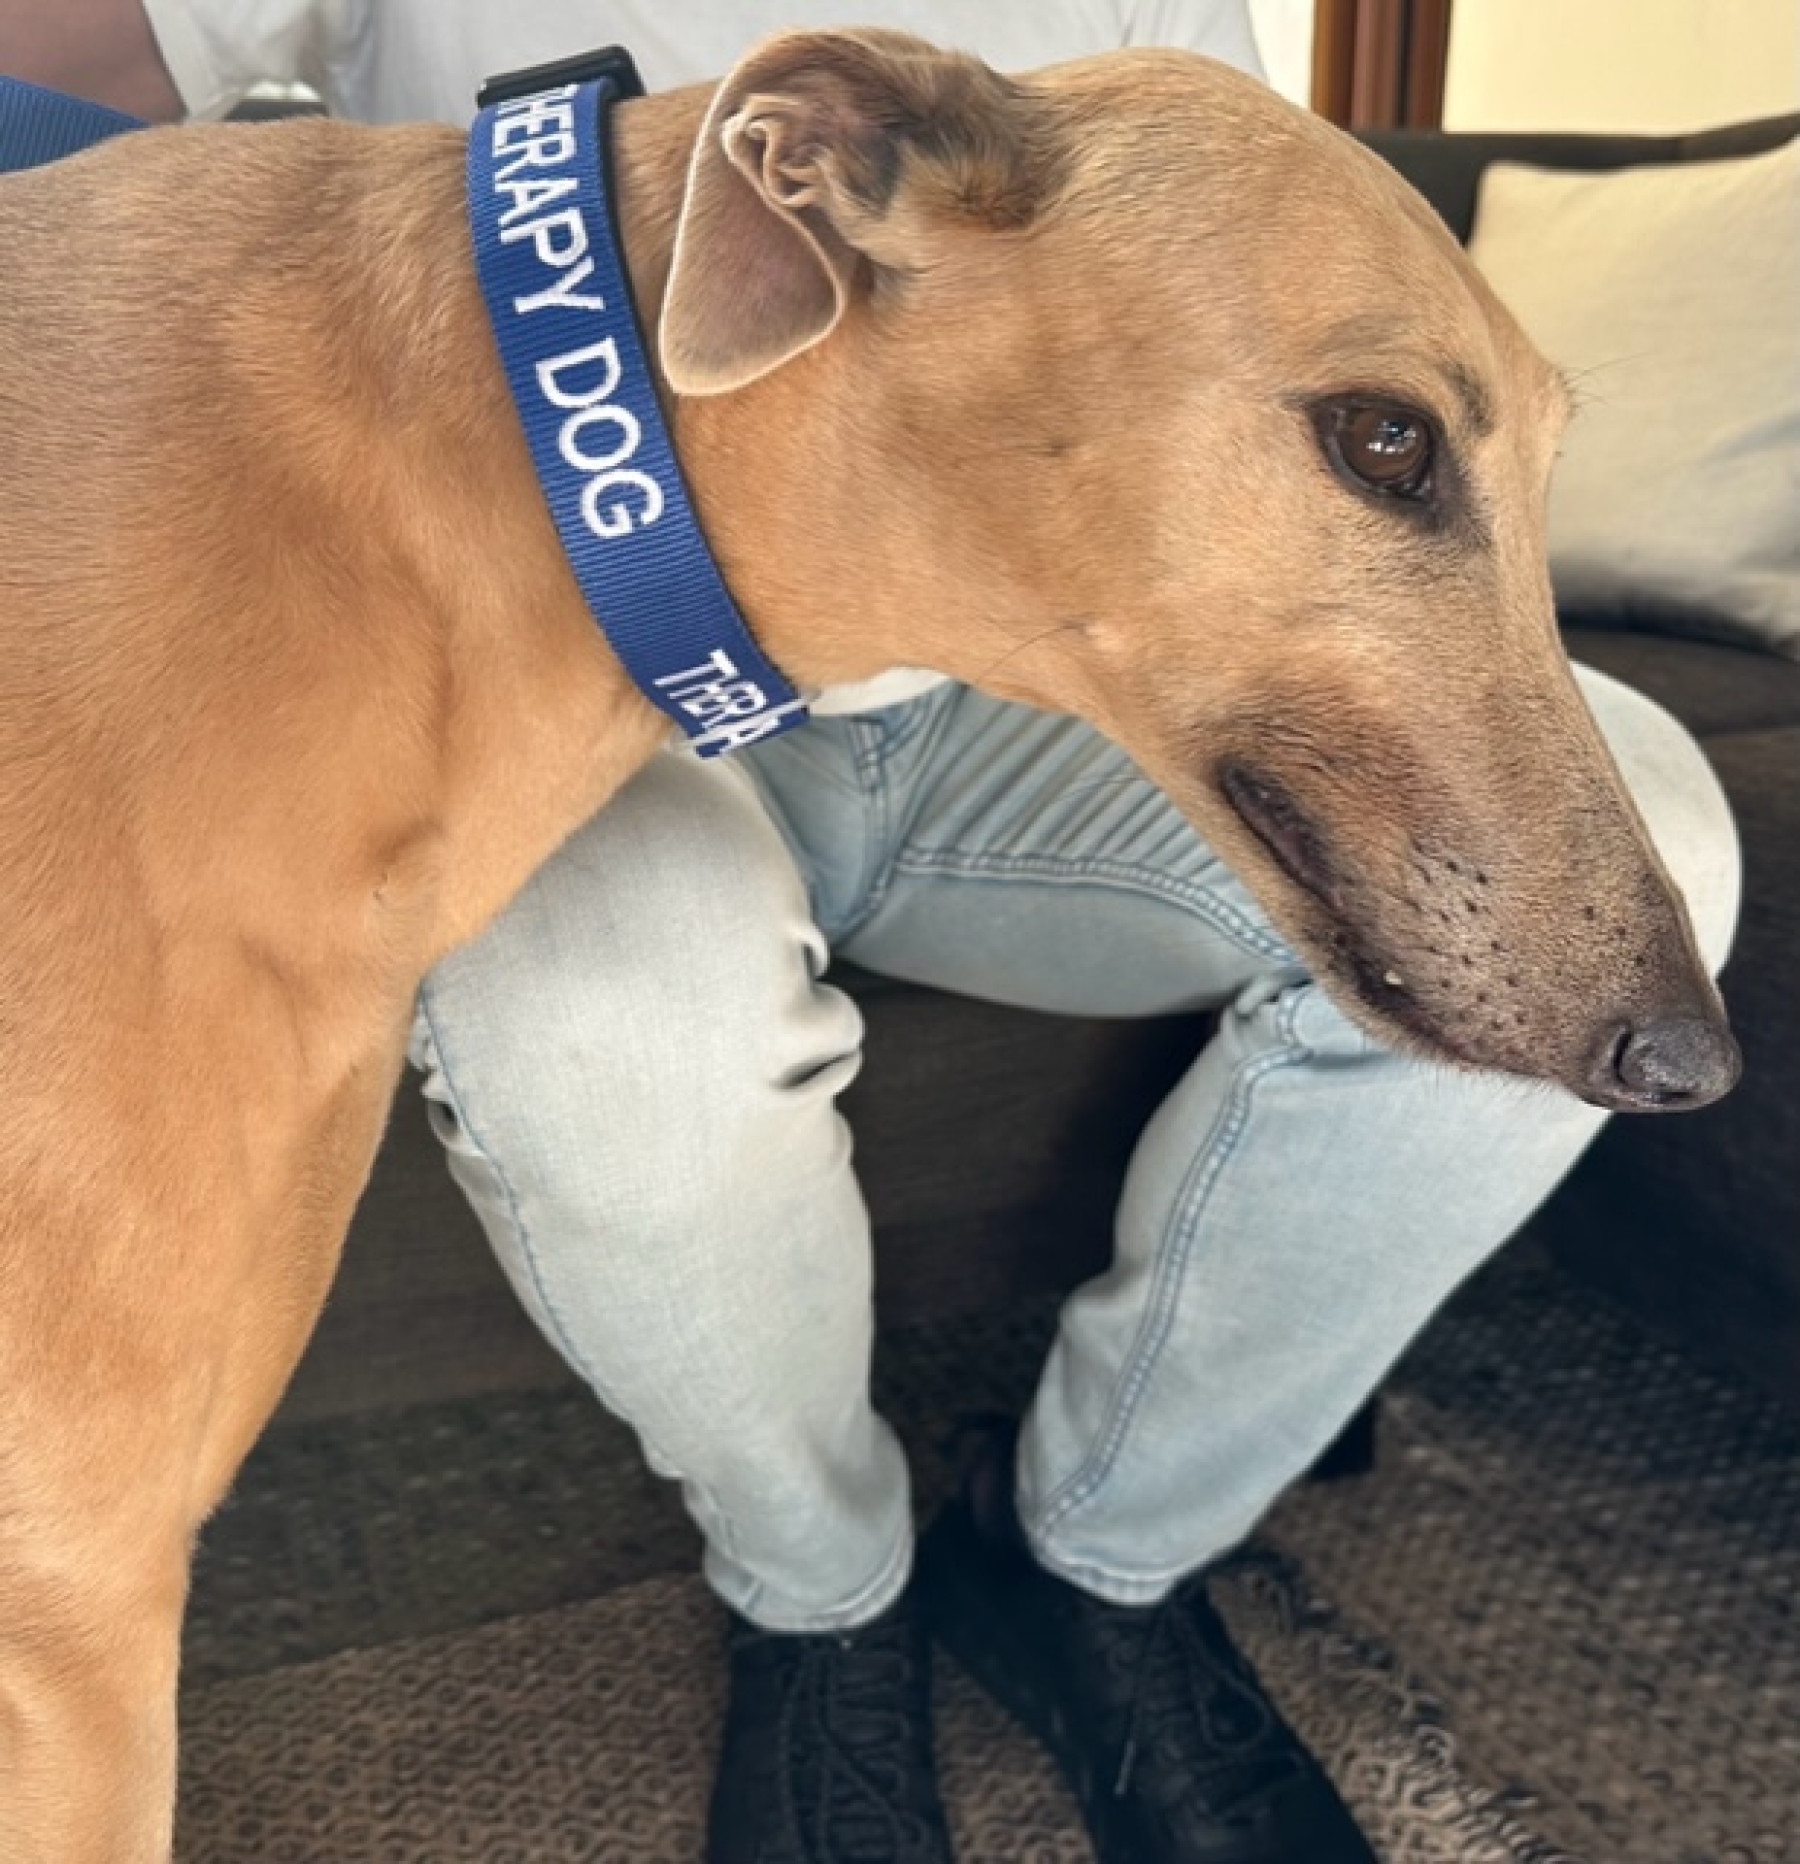 Greyhound Pet therapy dog called Bonnie with blue collar